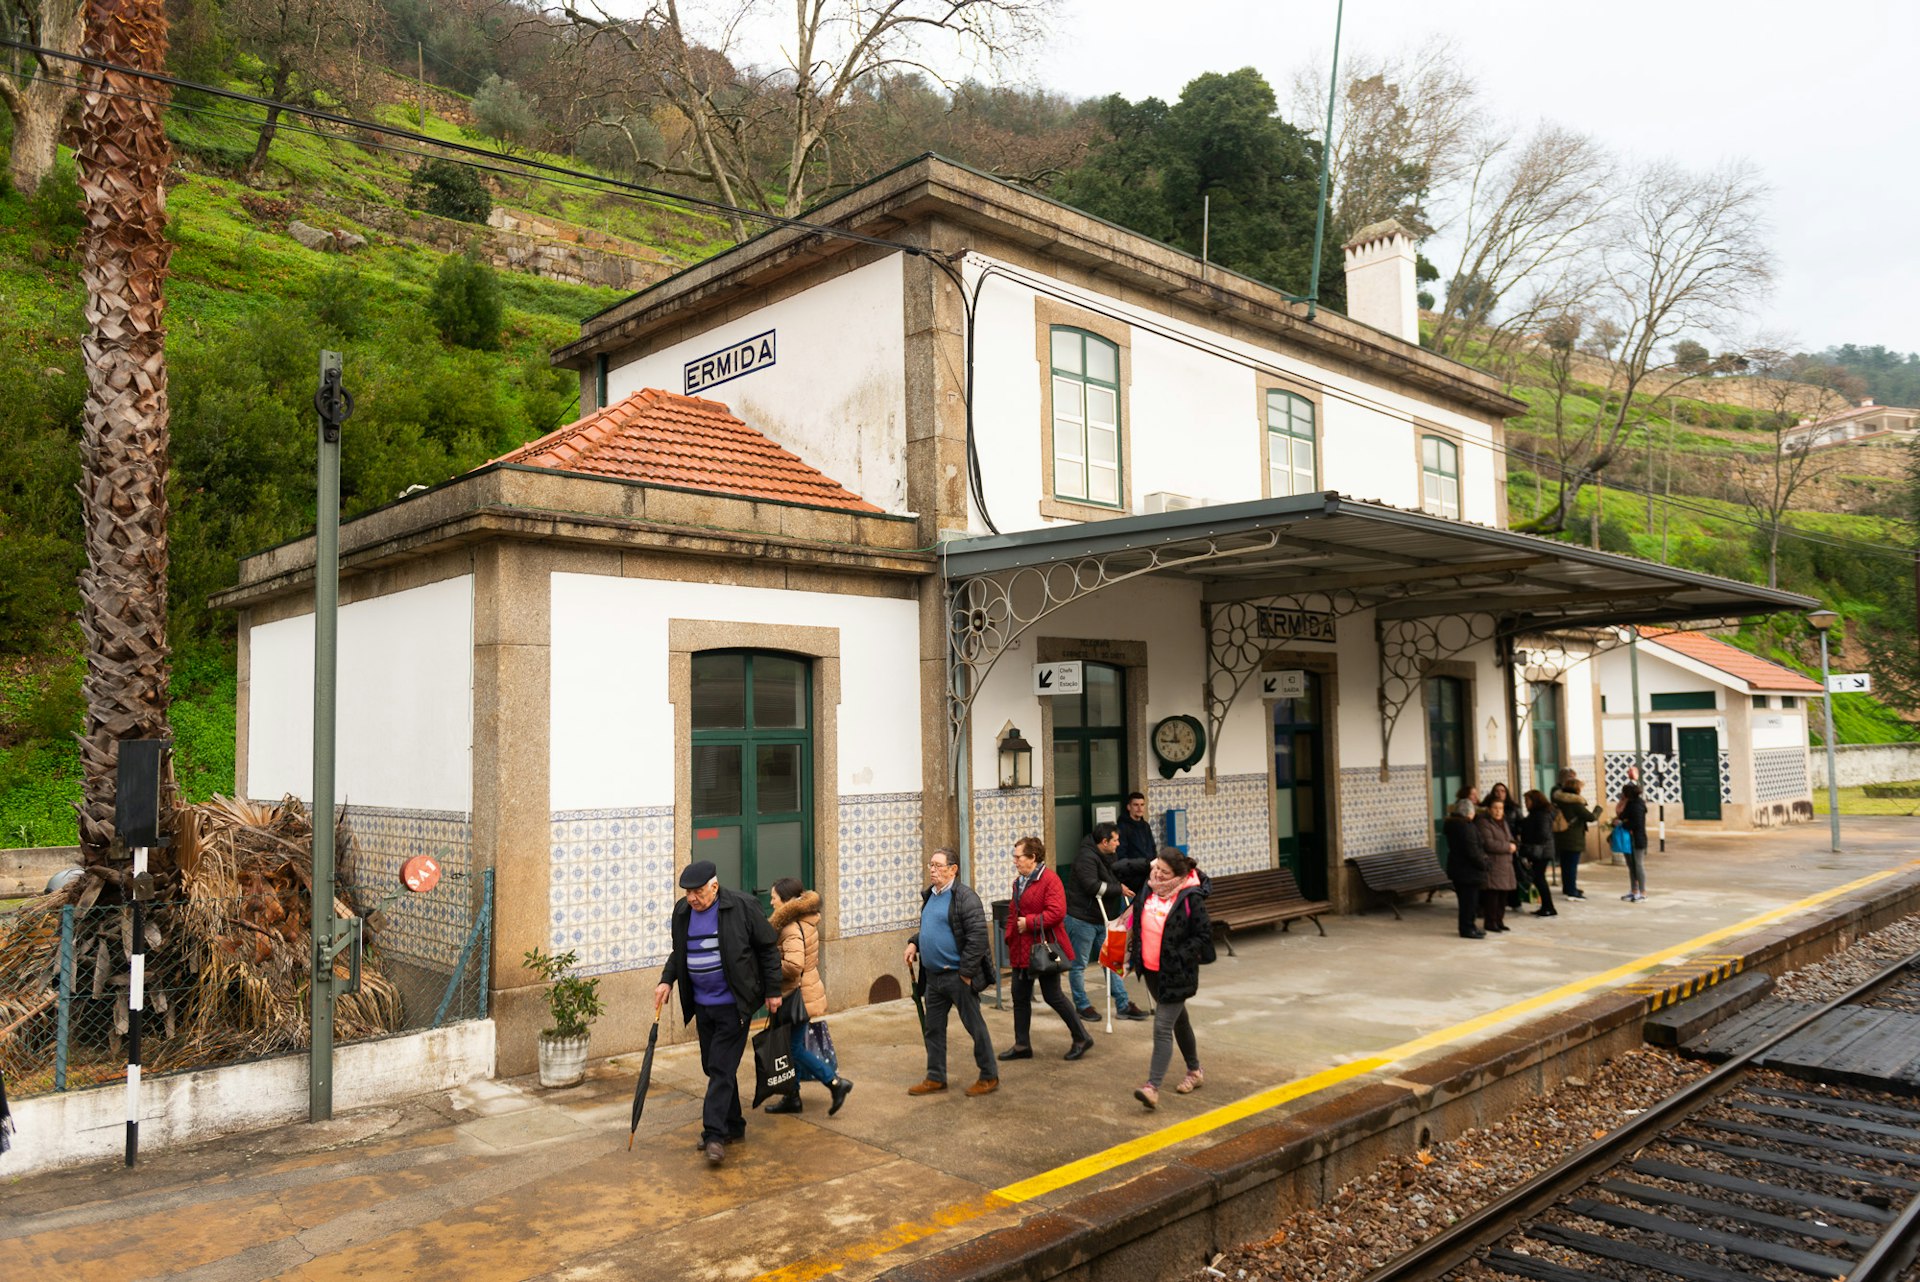 A typical station along the Linha do Douro, the train that runs from Porto to Pocinho in northern Portugal